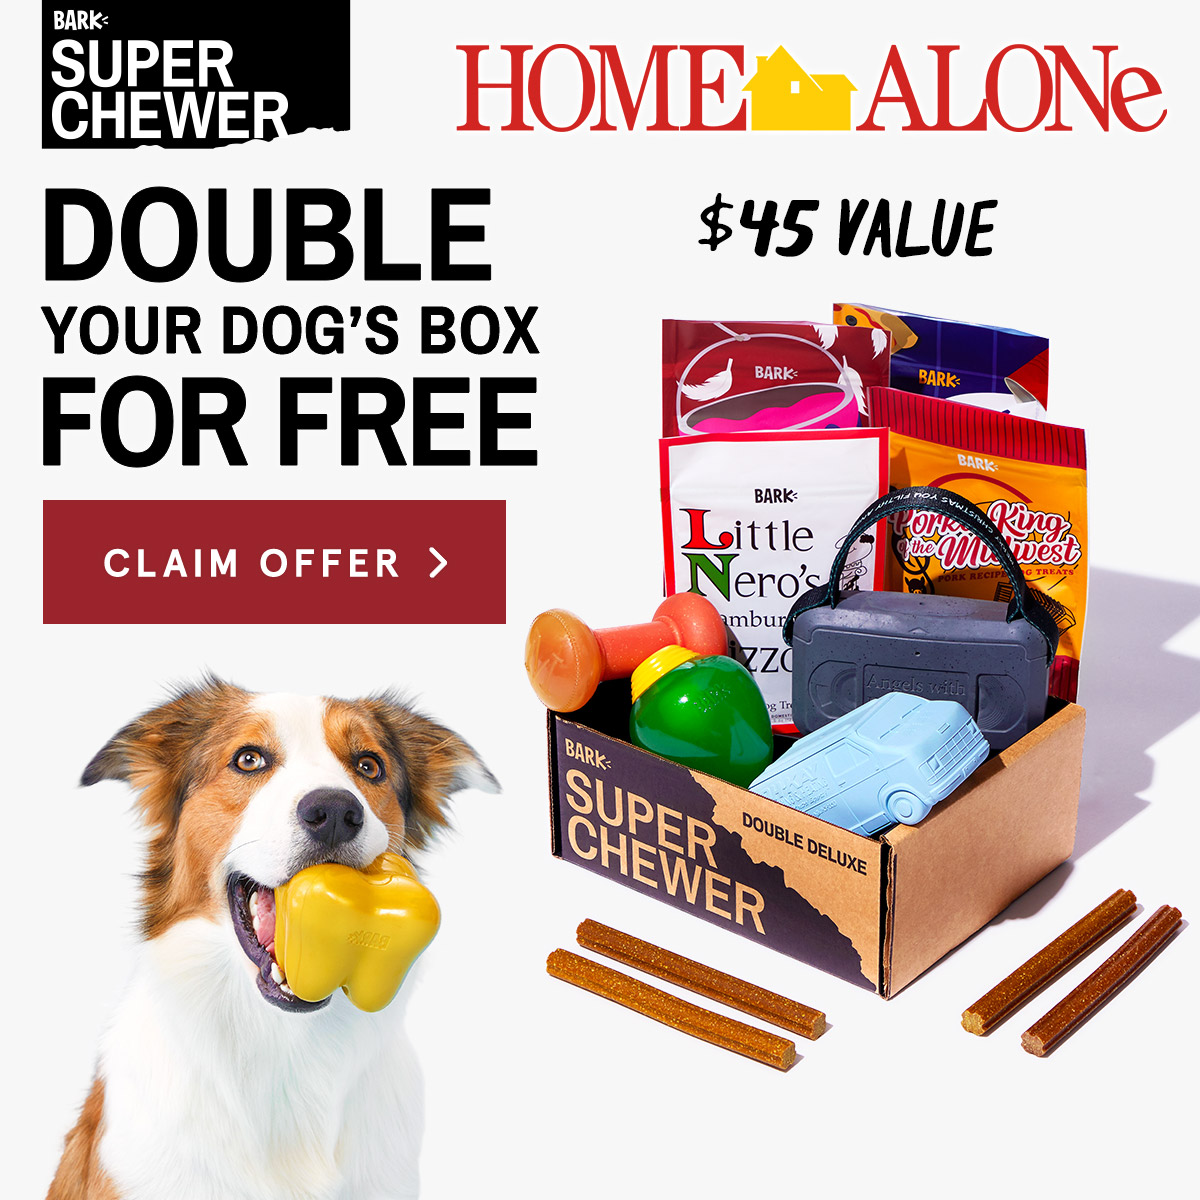 Super Chewer Cyber Monday Coupon – Double Your First Box + Home Alone Theme!